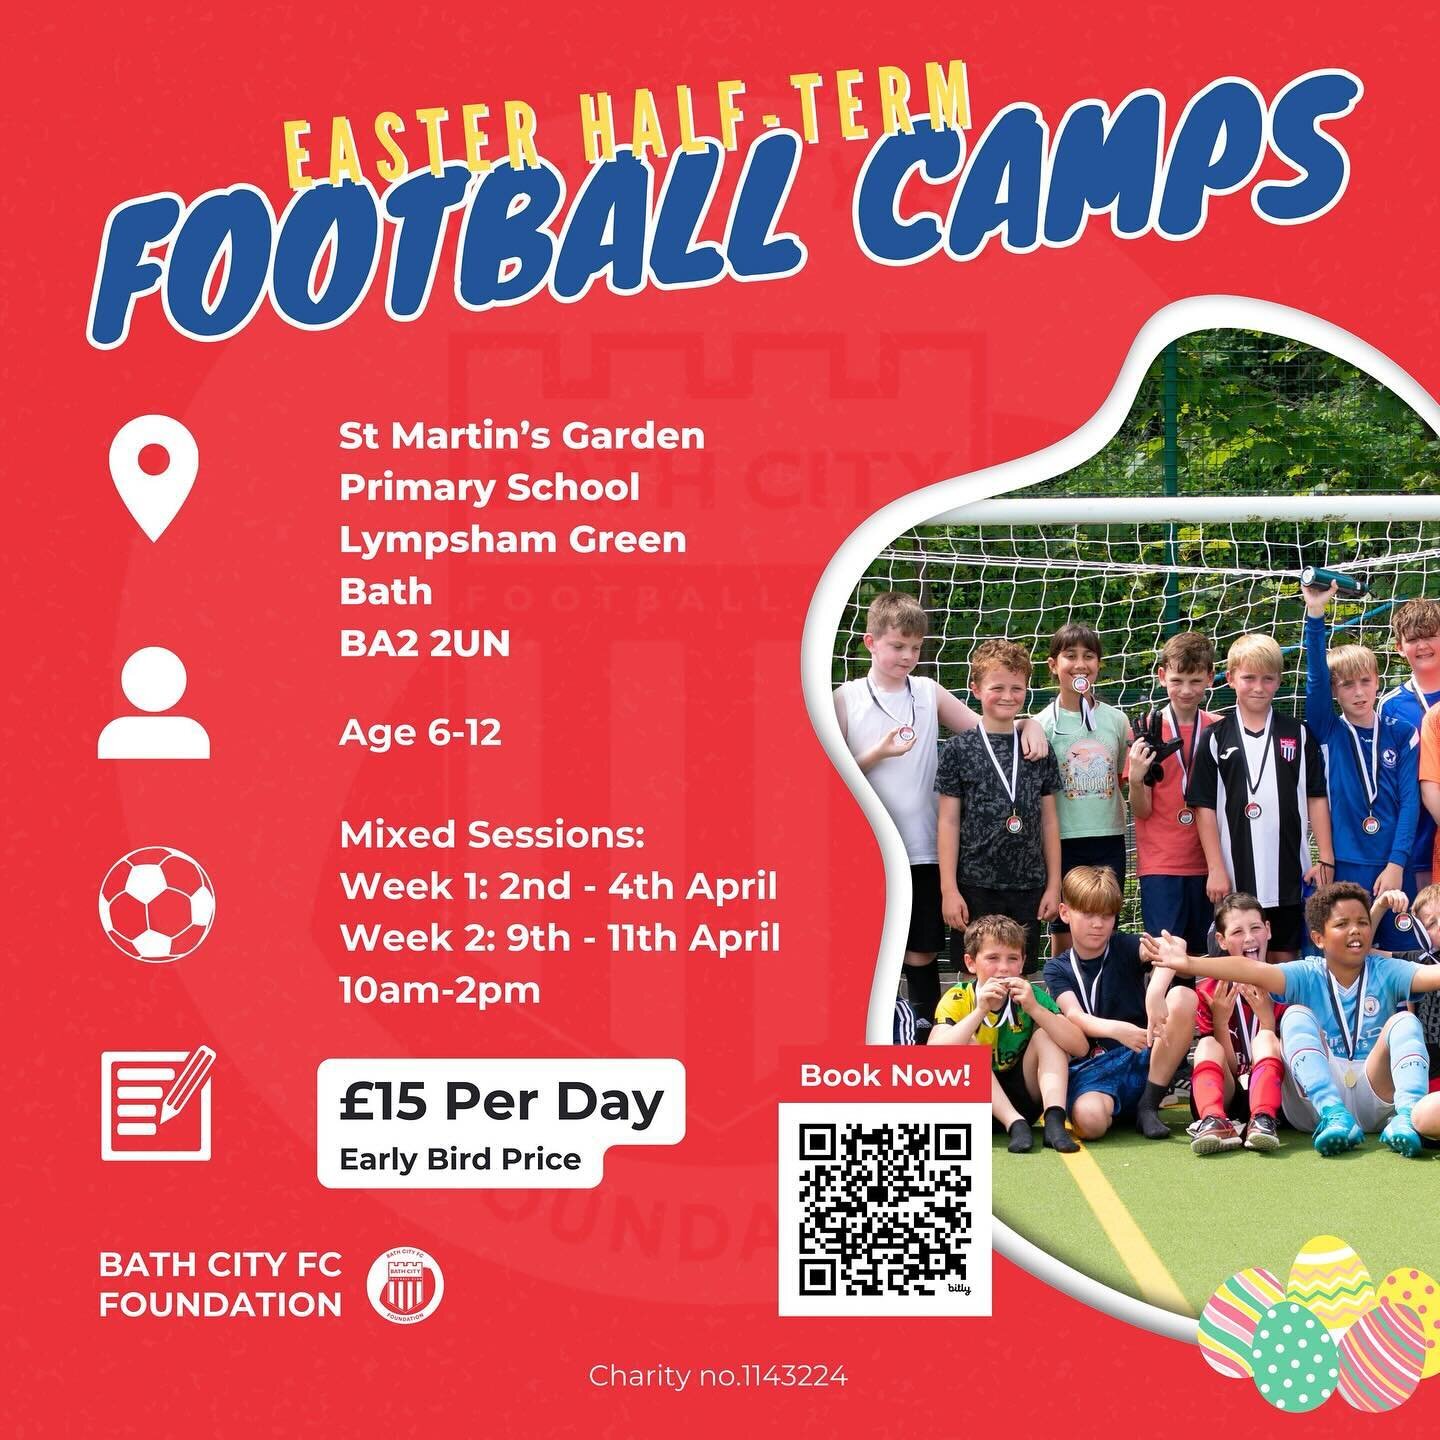 Less than two weeks to go until our Easter Football Camps, including our girls-only session! 🐣 

📍 St Martin&rsquo;s Garden Primary School 
📅 2nd April - 11th April
🎟️ &pound;15 mixed / &pound;10 girls-only 

Book now ➡️ link in bio.

#WhoCaresWi